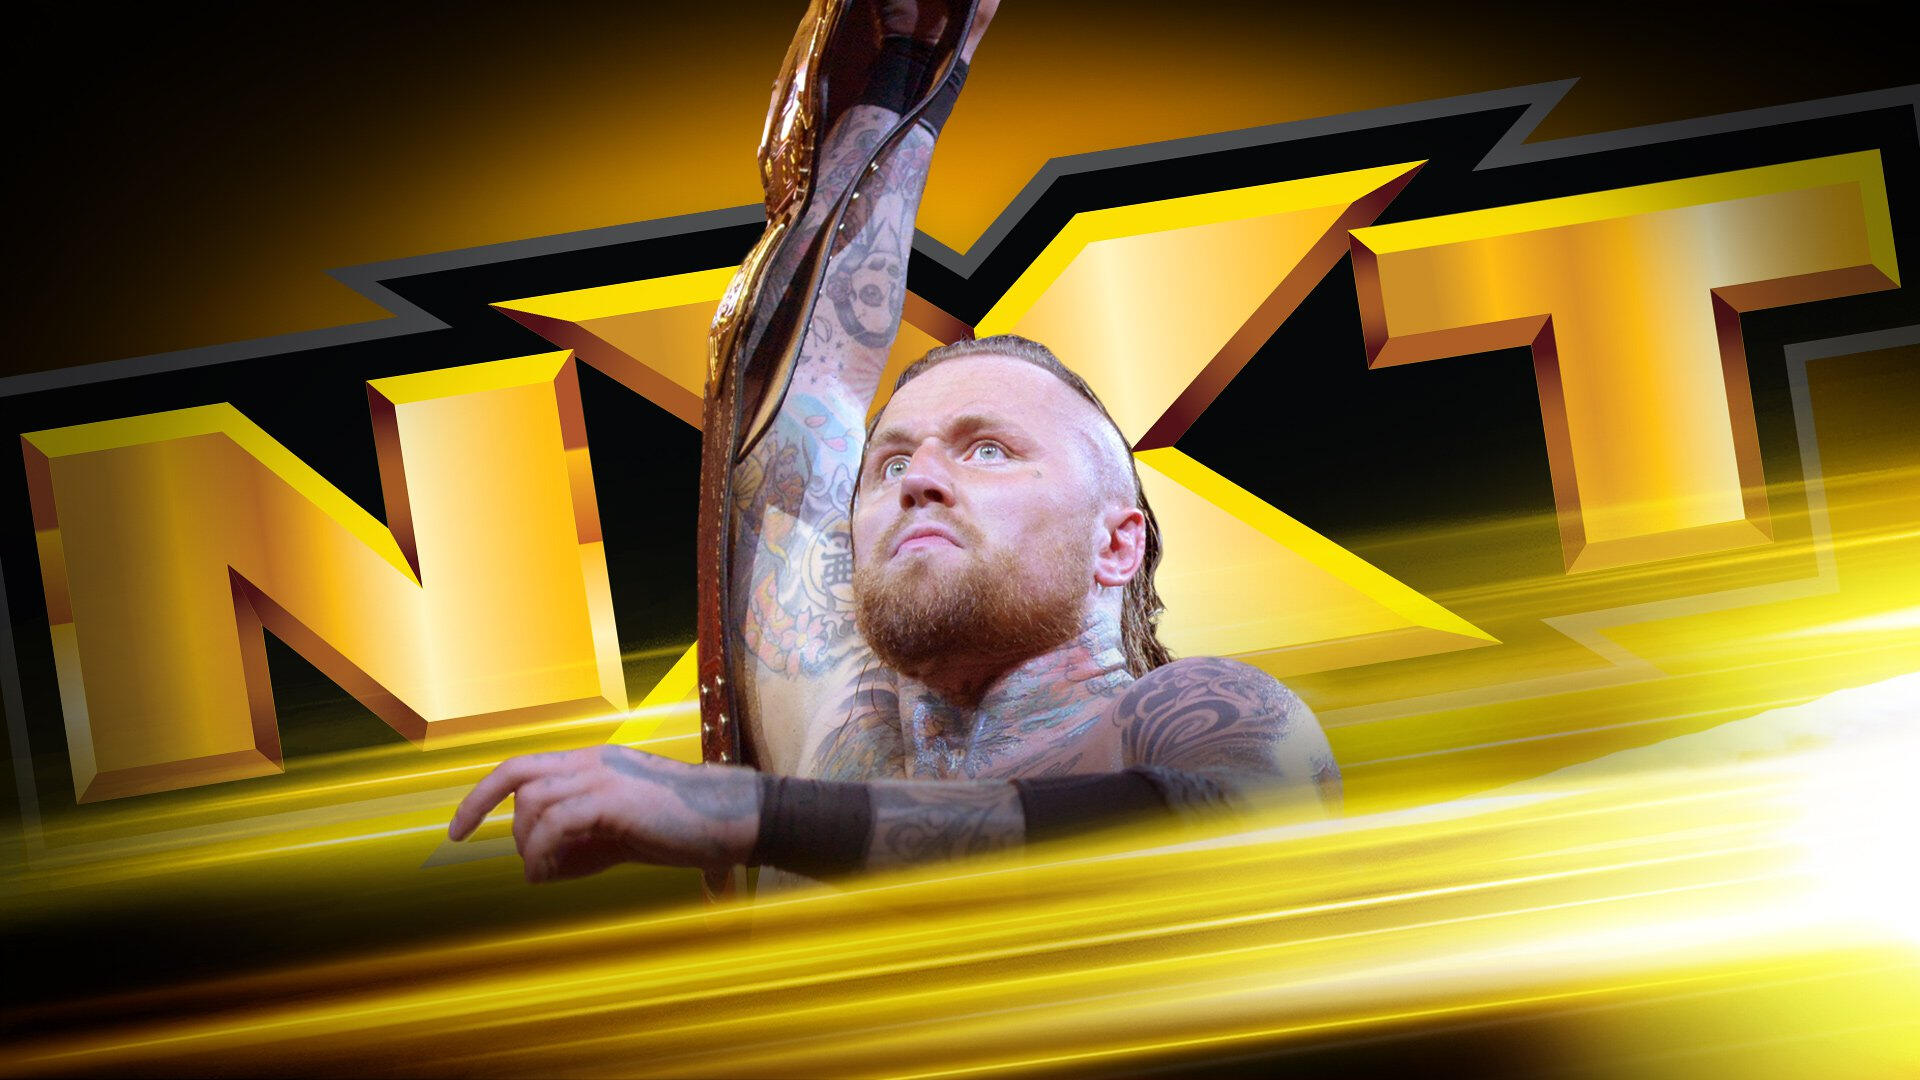 20180410_MatchGraphic_NXT_Aleister2--3be580466dfd18960e611a20083ee5f6.jpg